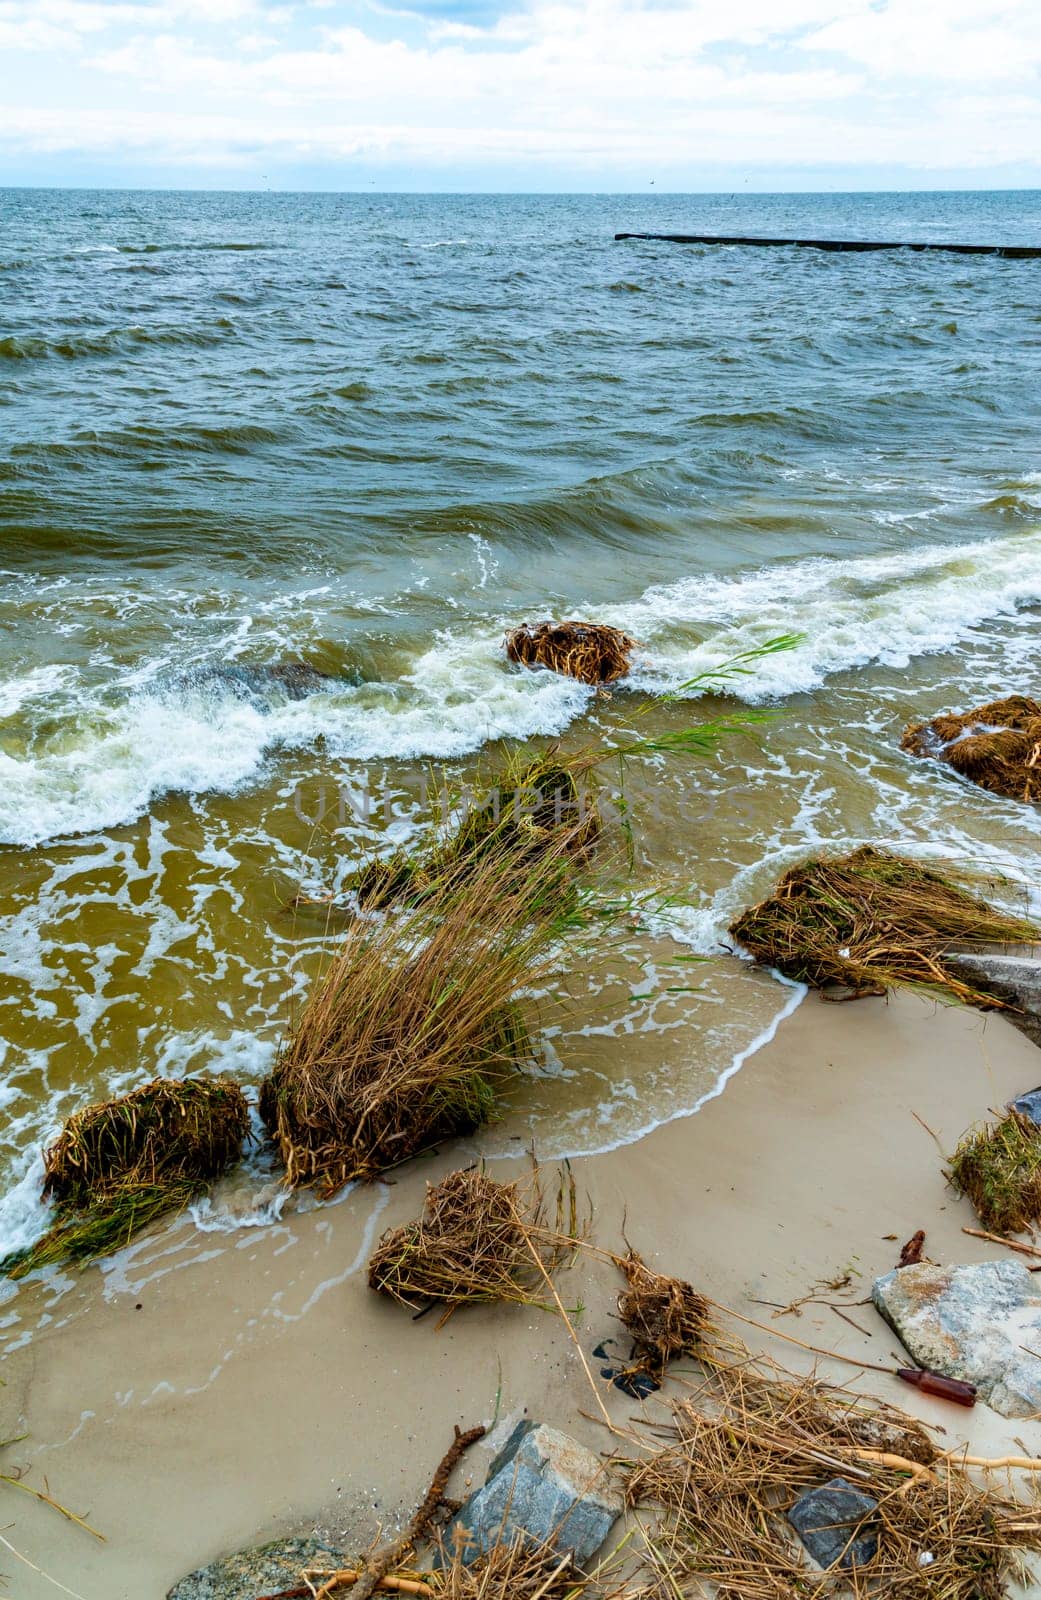 Consequences of the Accident at the Kakhovka power plant, pollution of the beaches of Odessa with garbage and plant remains brought by water by Hydrobiolog